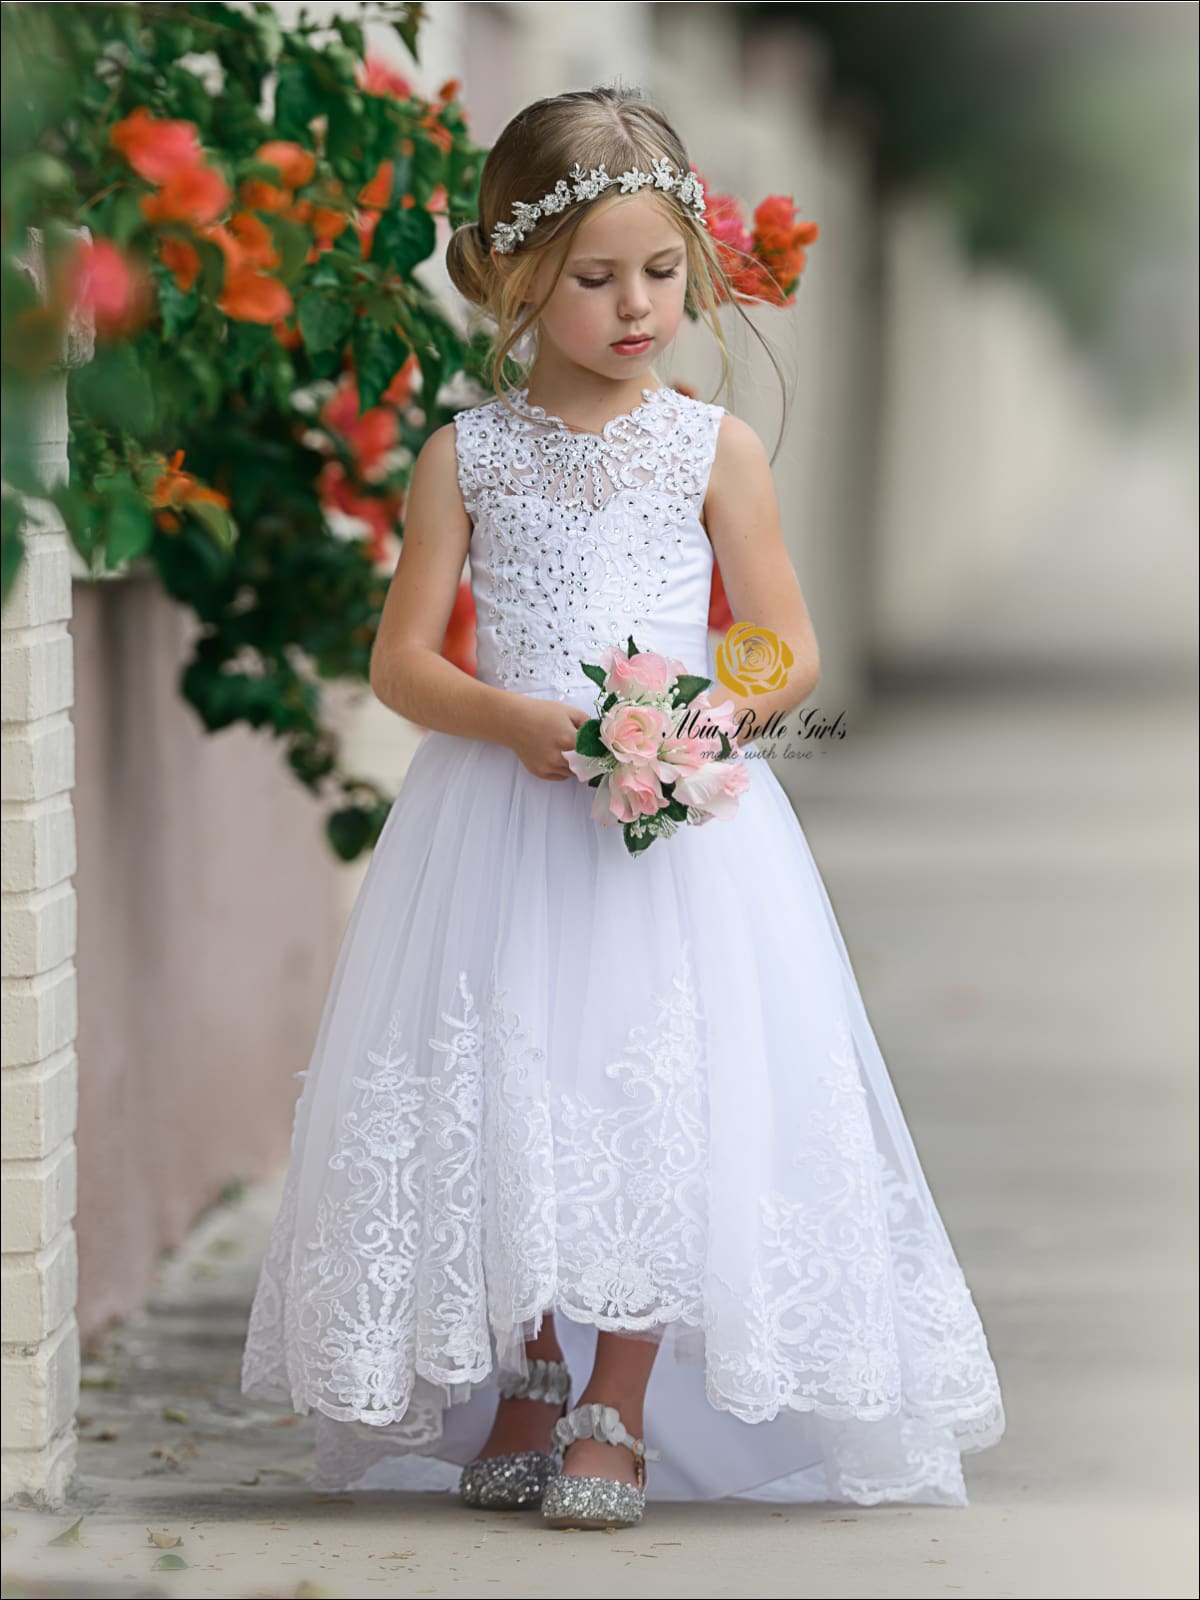 Lace Flower Girl Dress With Bow – Mia Belle Girls